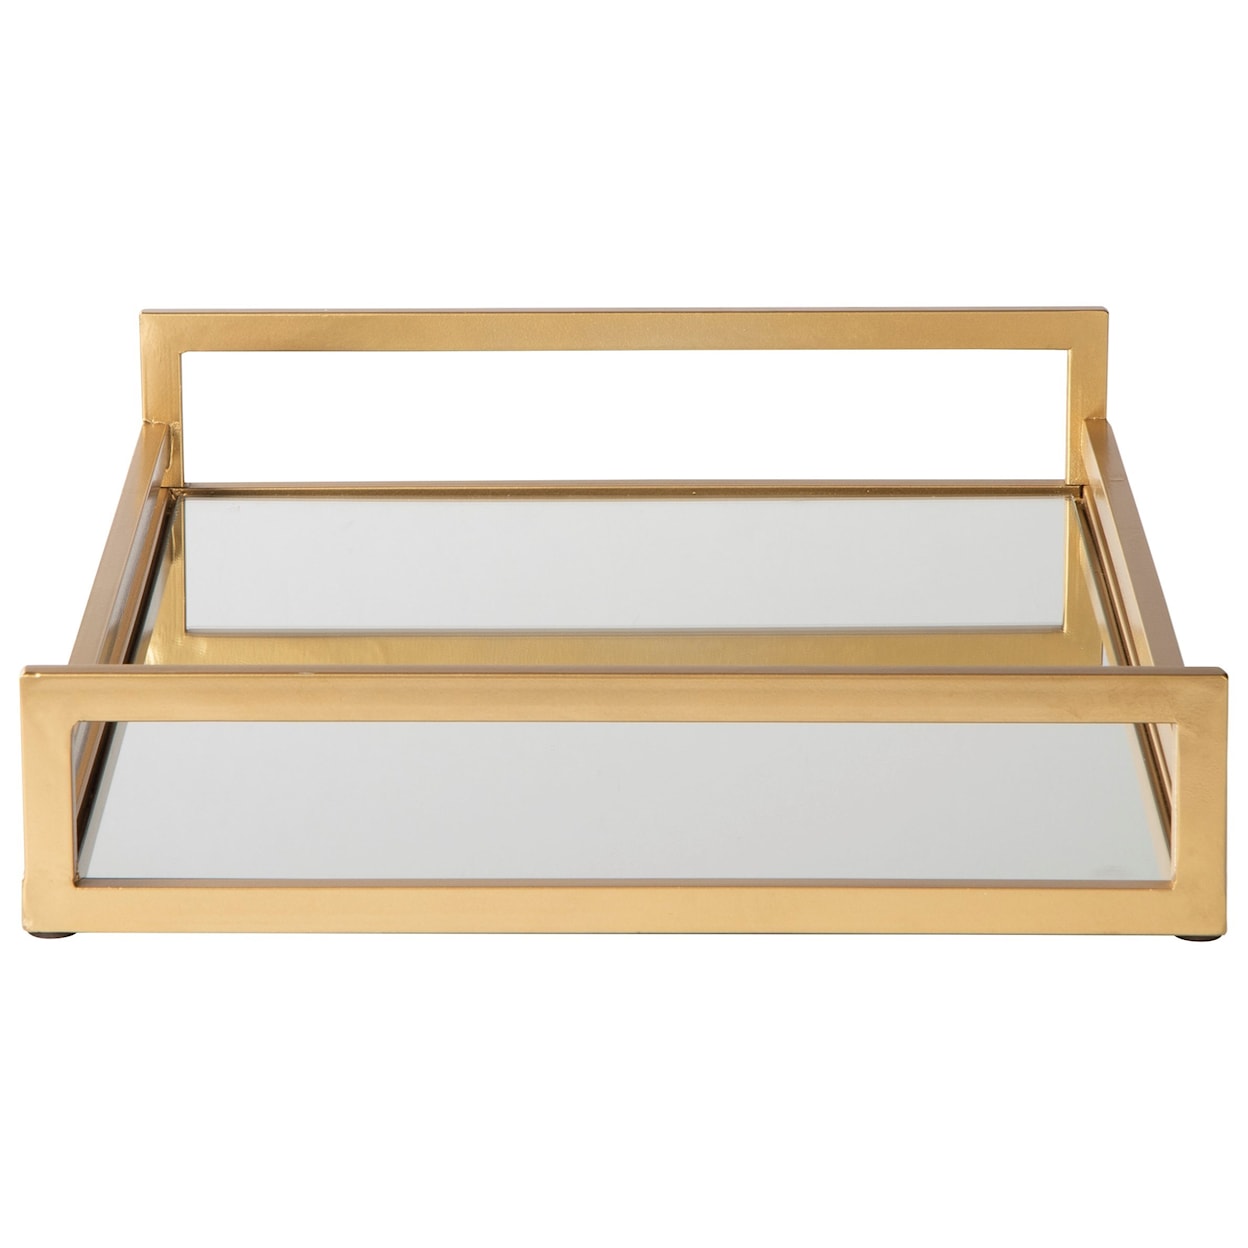 Signature Design by Ashley Accents Derex Gold Finish Tray